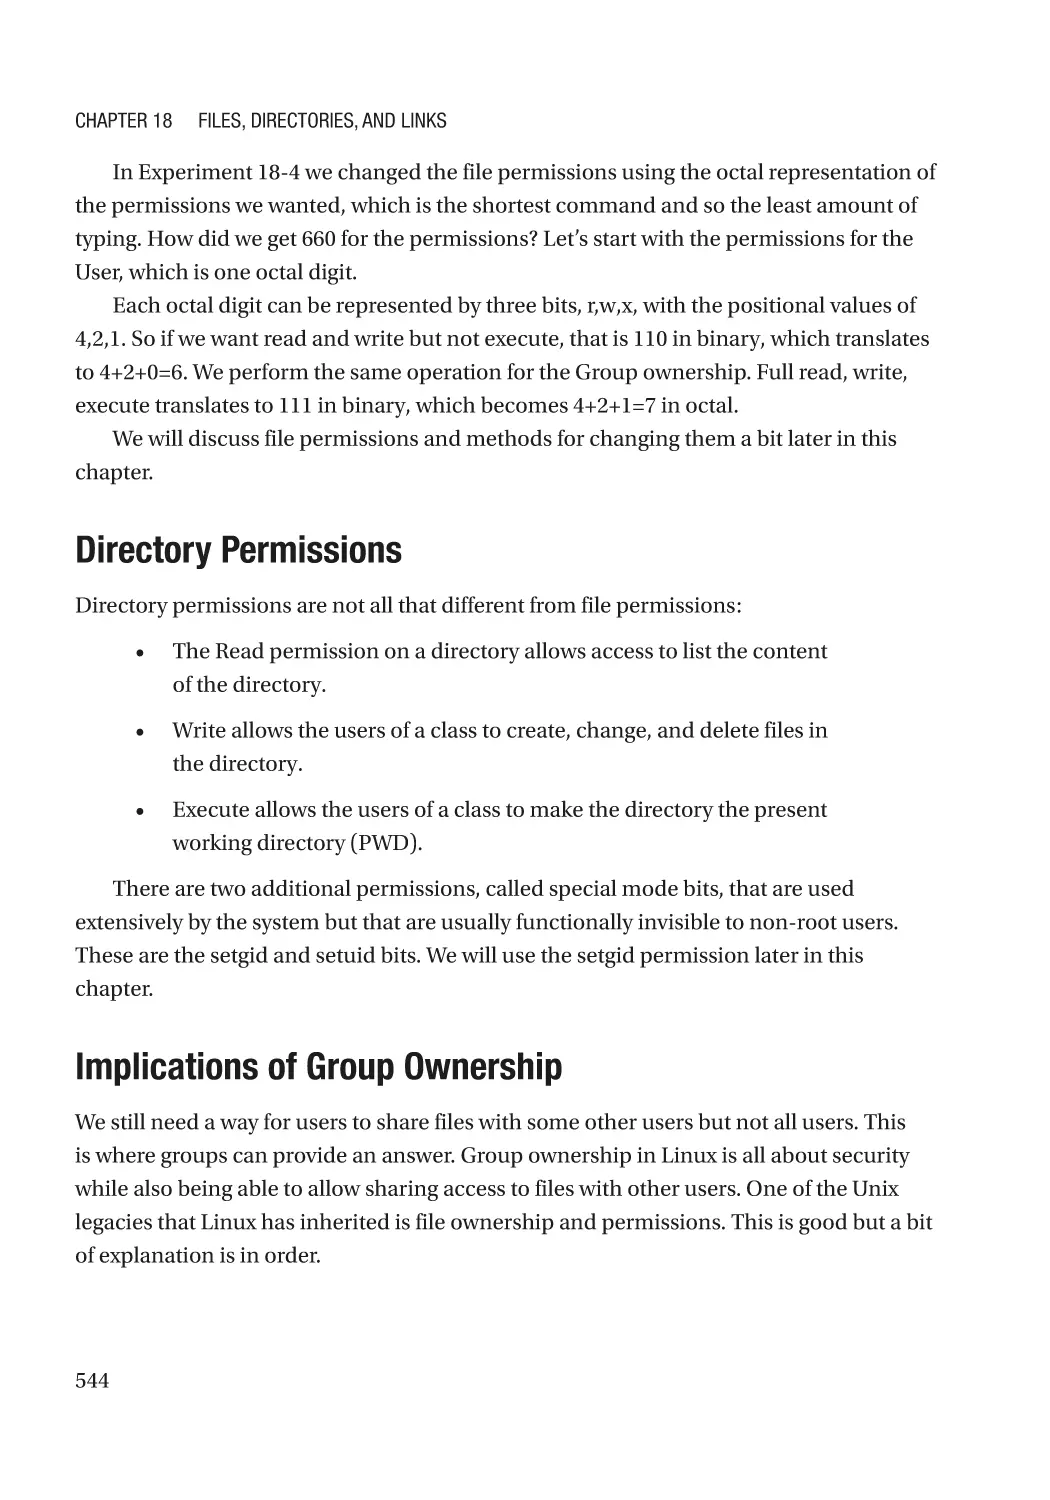 Directory Permissions
Implications of Group Ownership